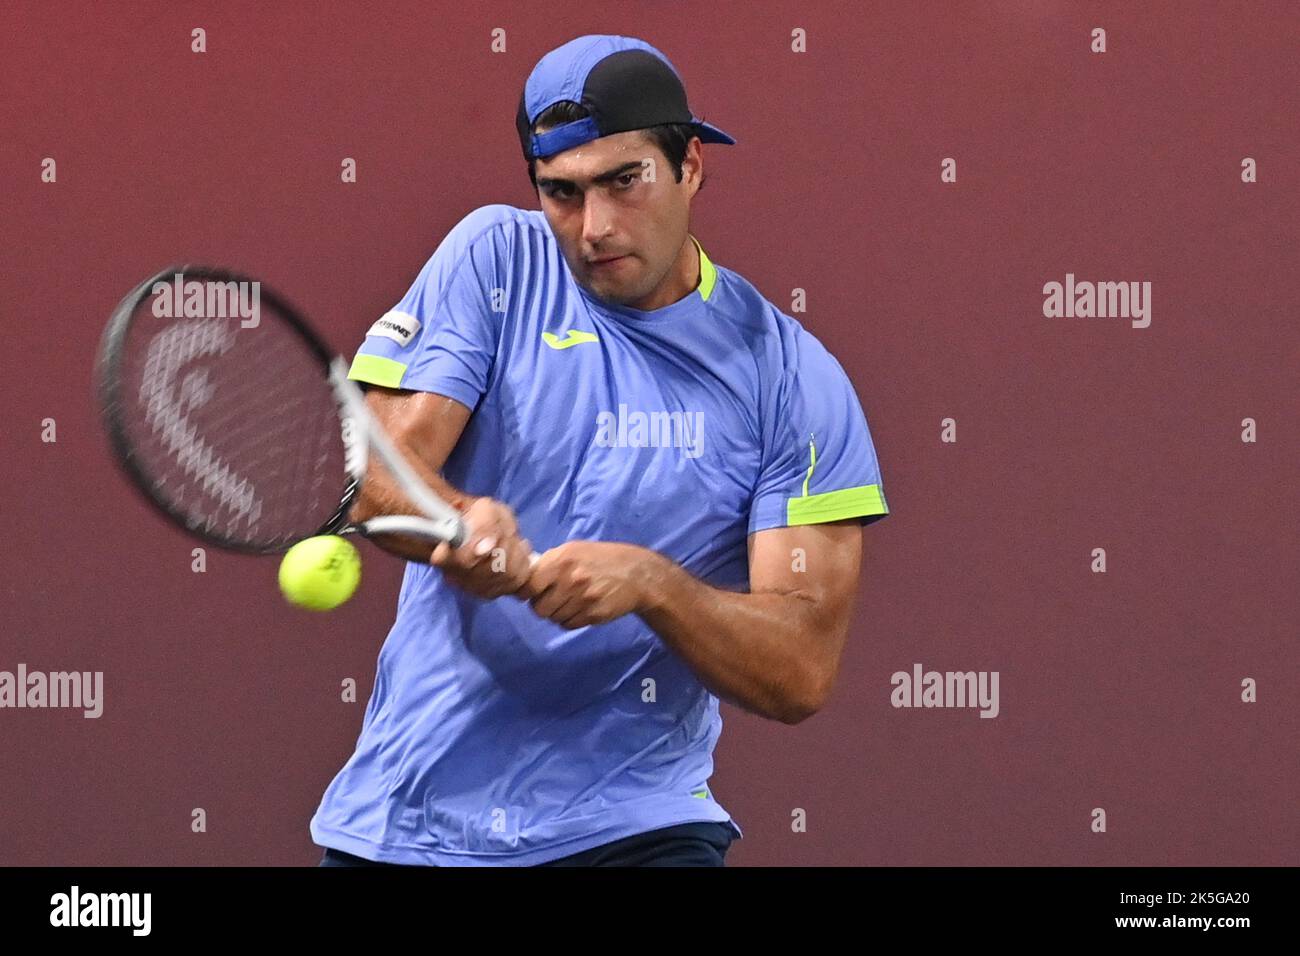 Pala Wanny, Florence, Italy, October 08, 2022, Gianmarco Ferrari of Italy  during UniCredit Firenze Open - Qualifications - Gianmarco Ferrari vs Damir  Dzumhur - Tennis Internationals Stock Photo - Alamy